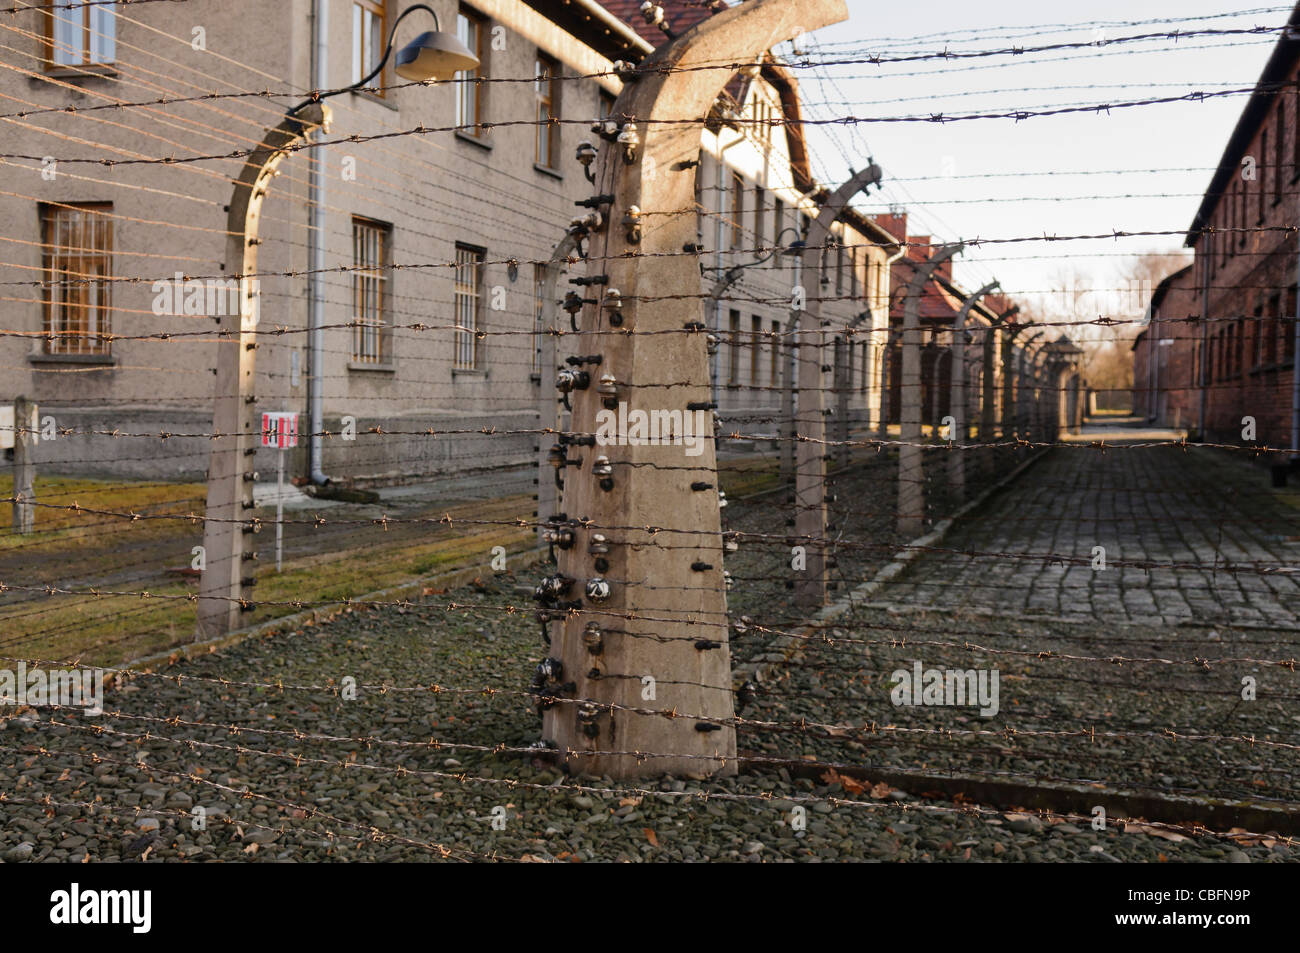 Electric fence at Auschwitz nazi concentration camp to stop escape from barracks Stock Photo